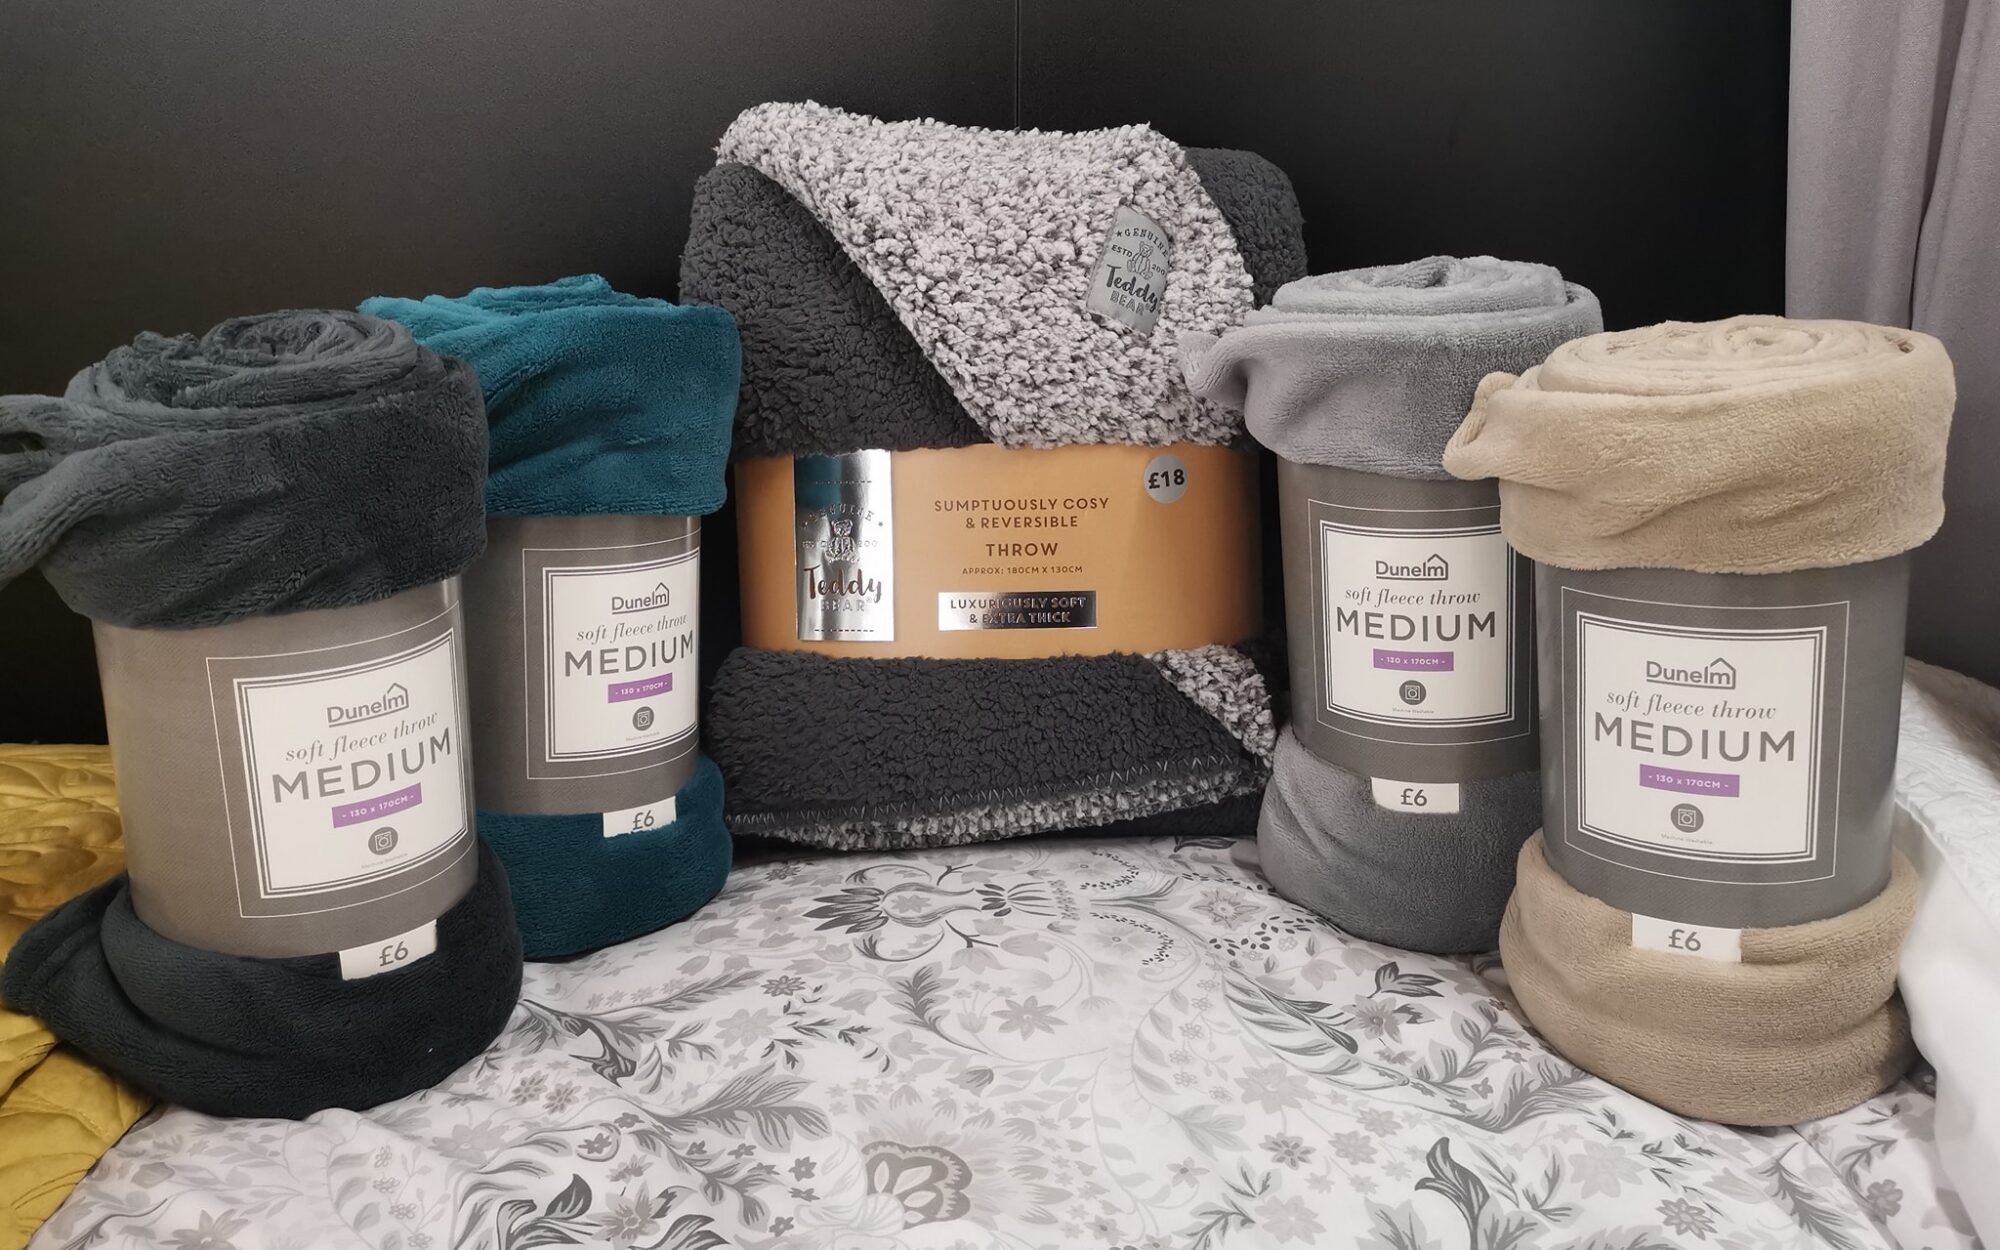 Wheatlands giveaway prize - Dunelm throws